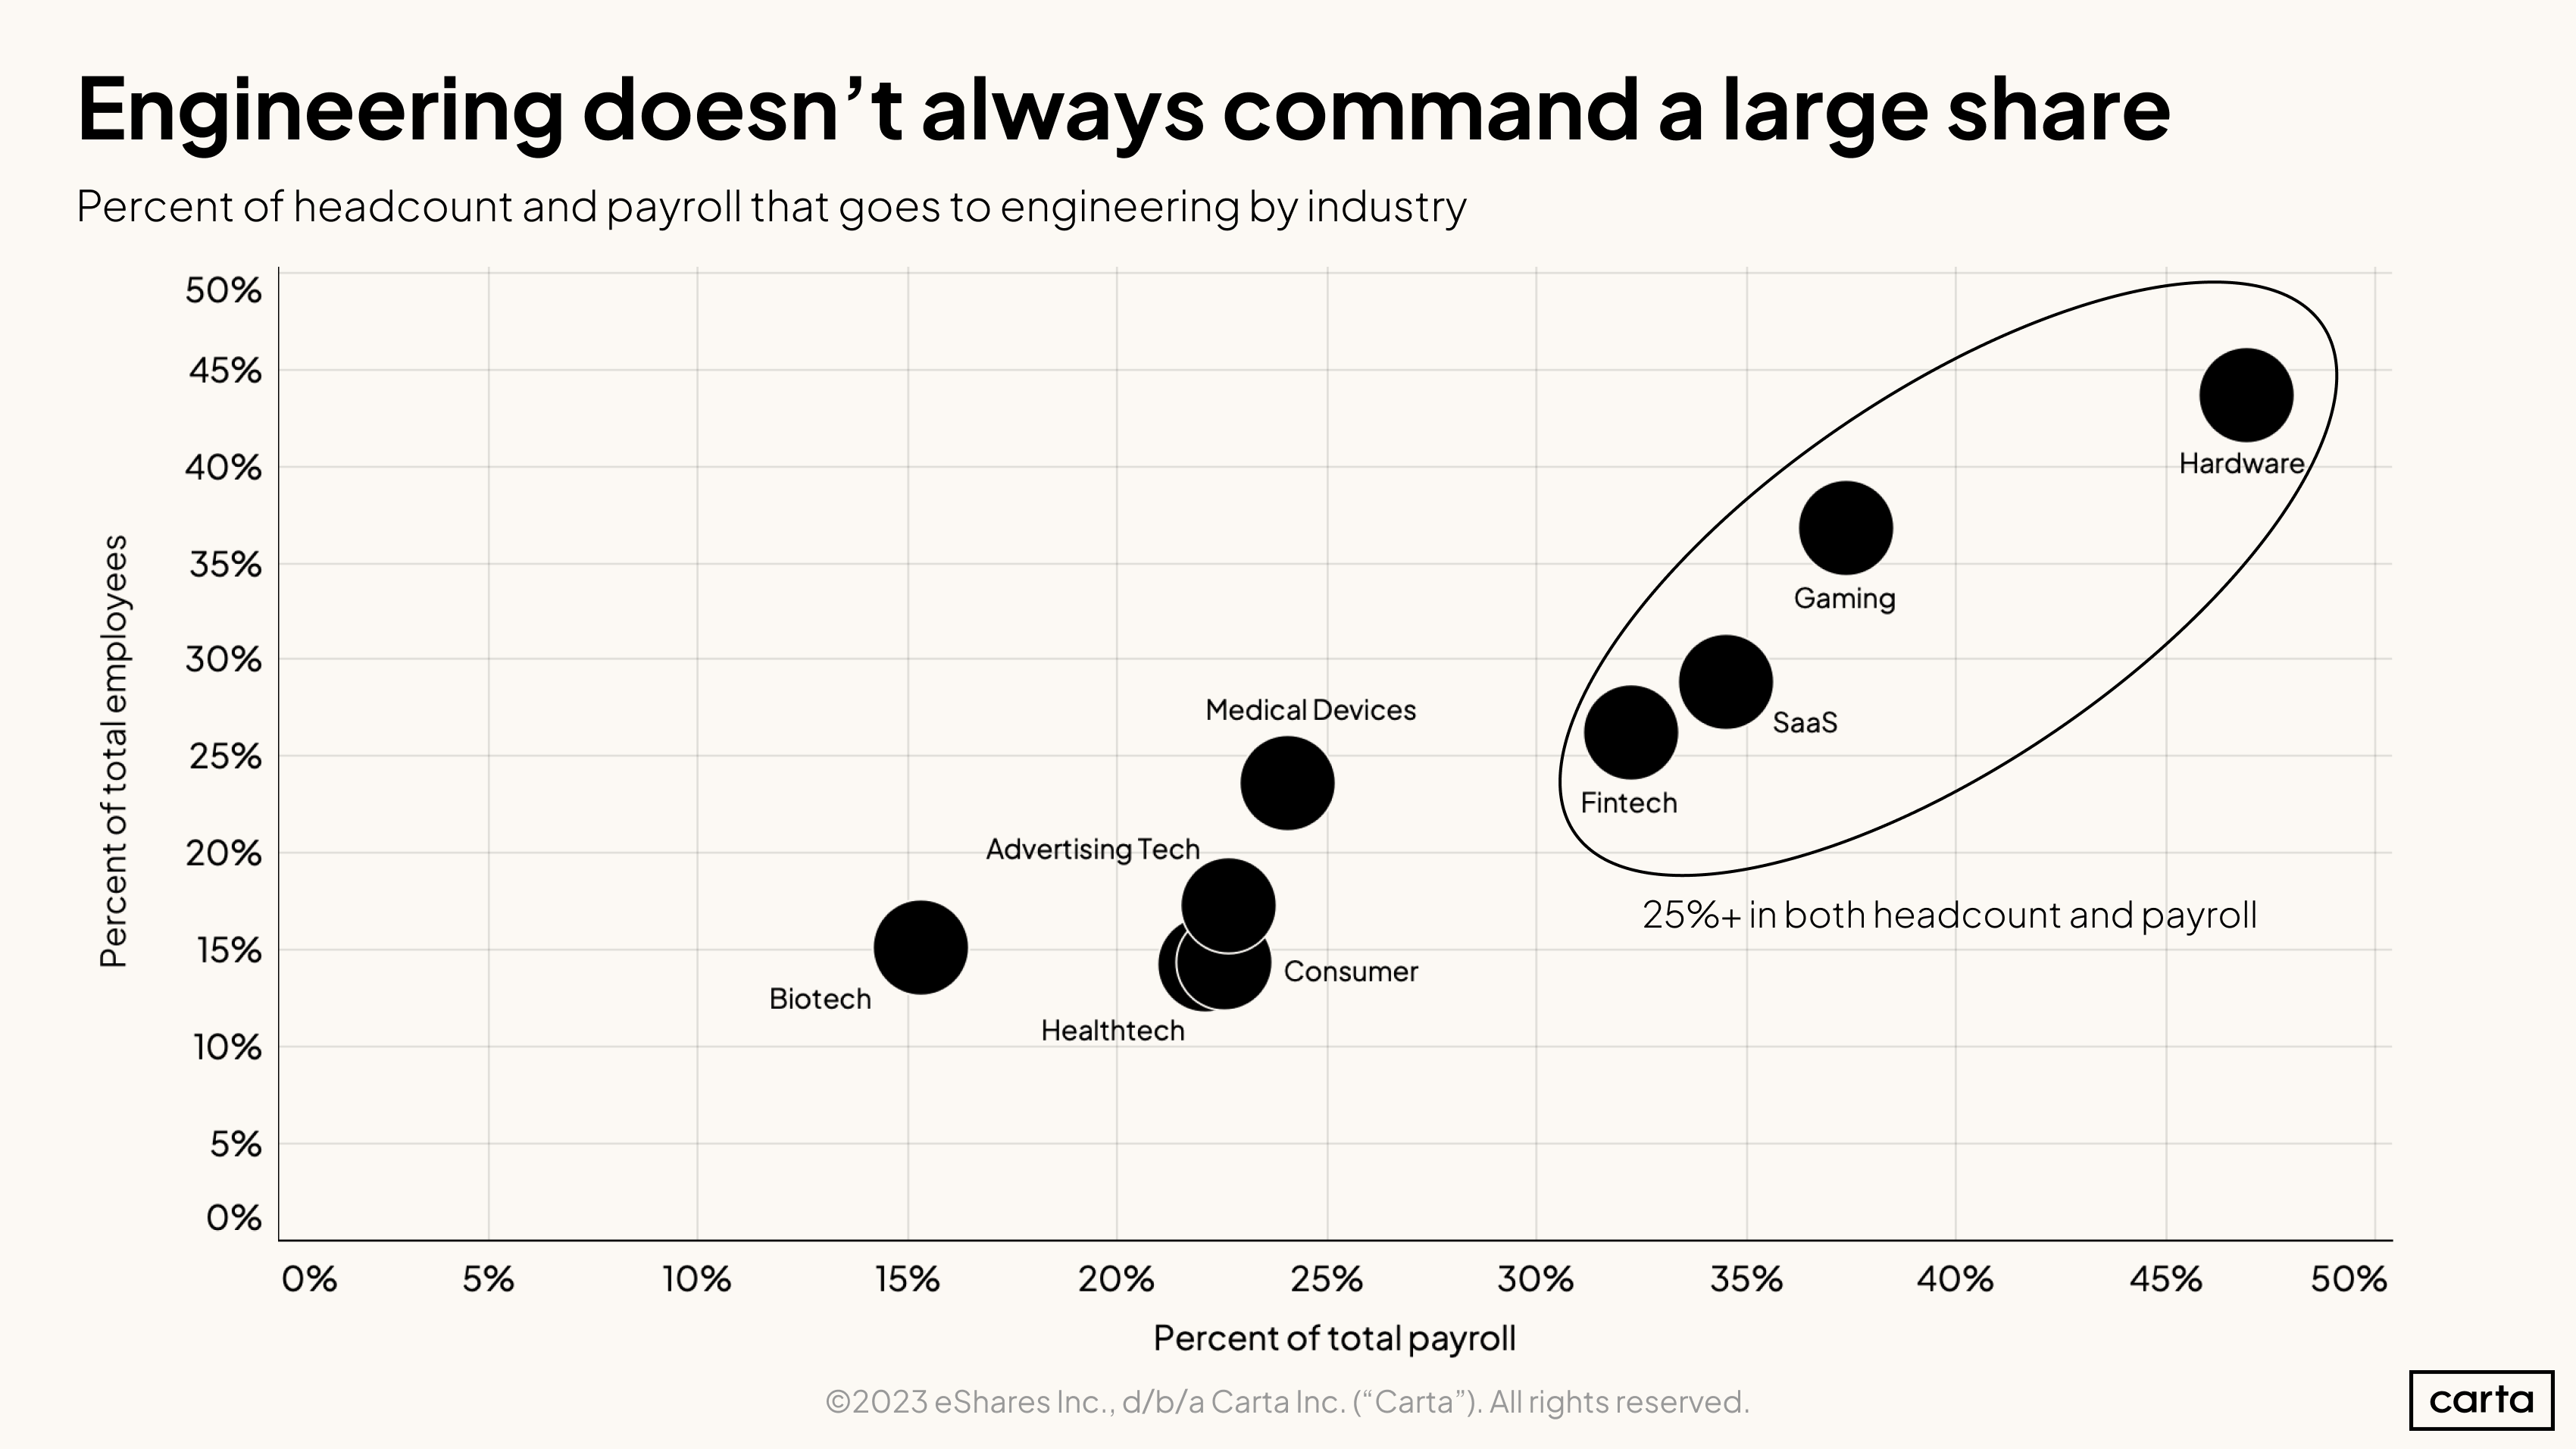 Percent of headcount and payroll that goes to engineering by industry